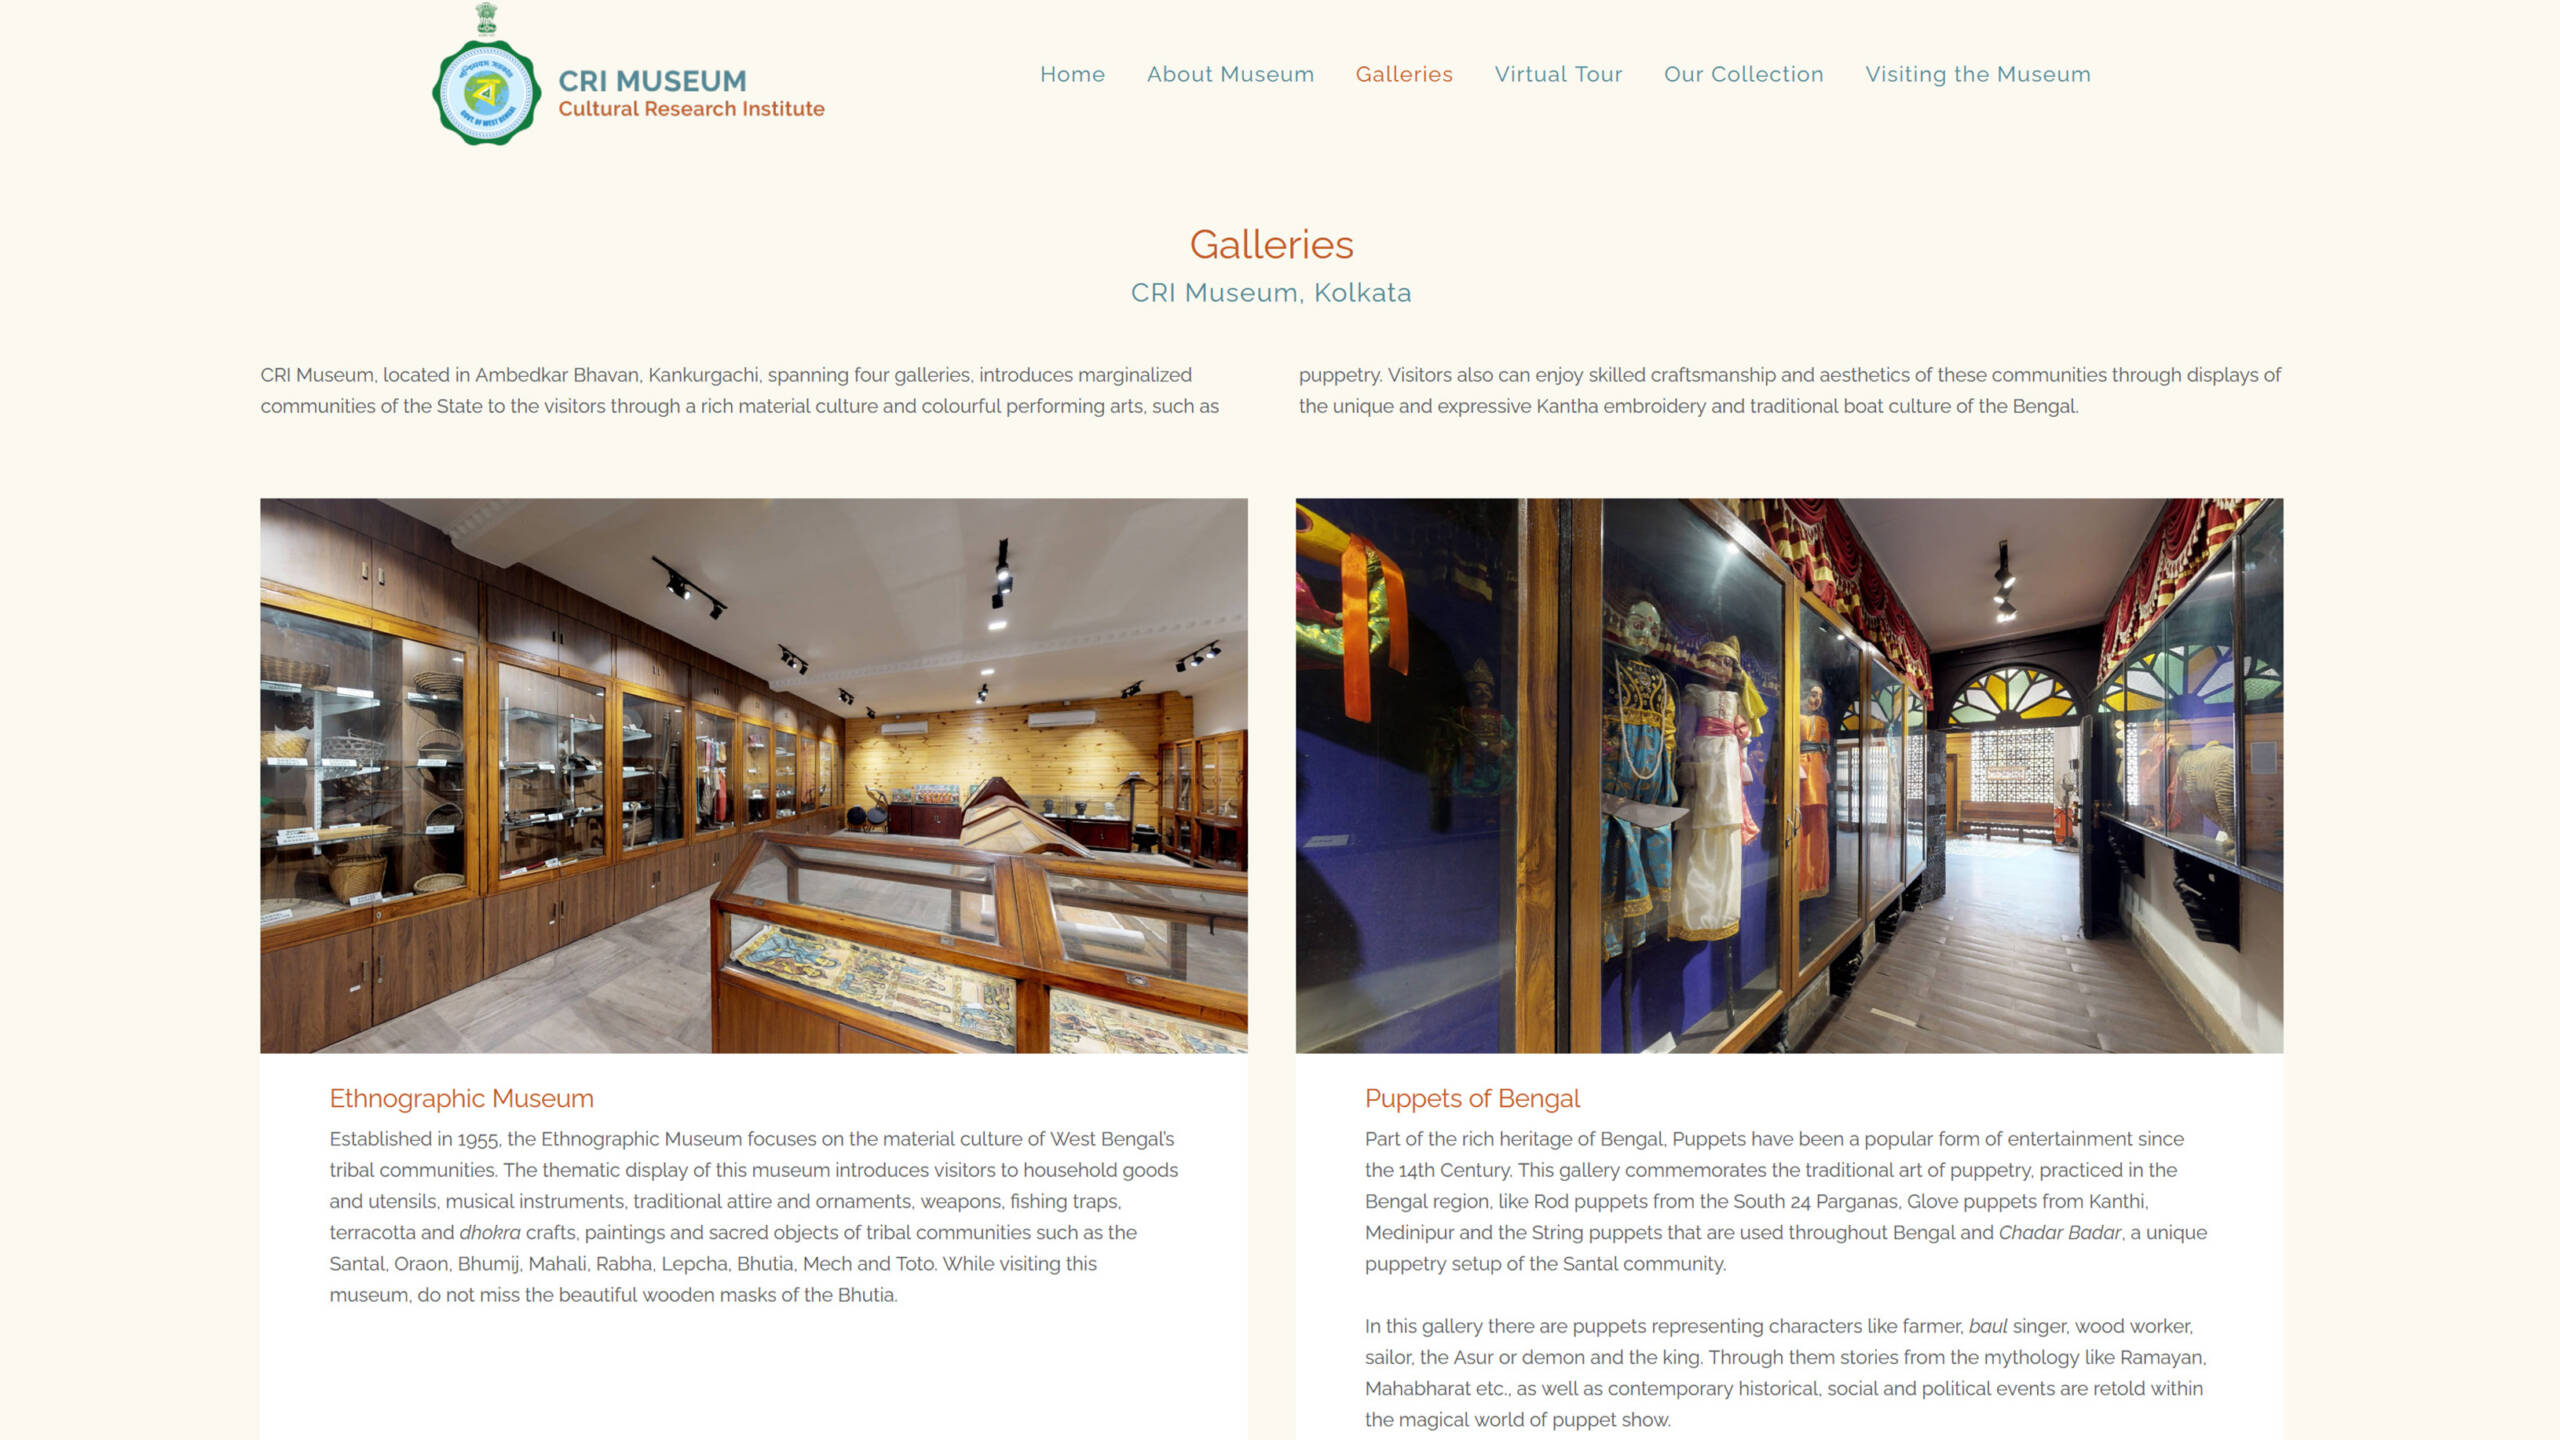 Galleries page of the website of CRI museum